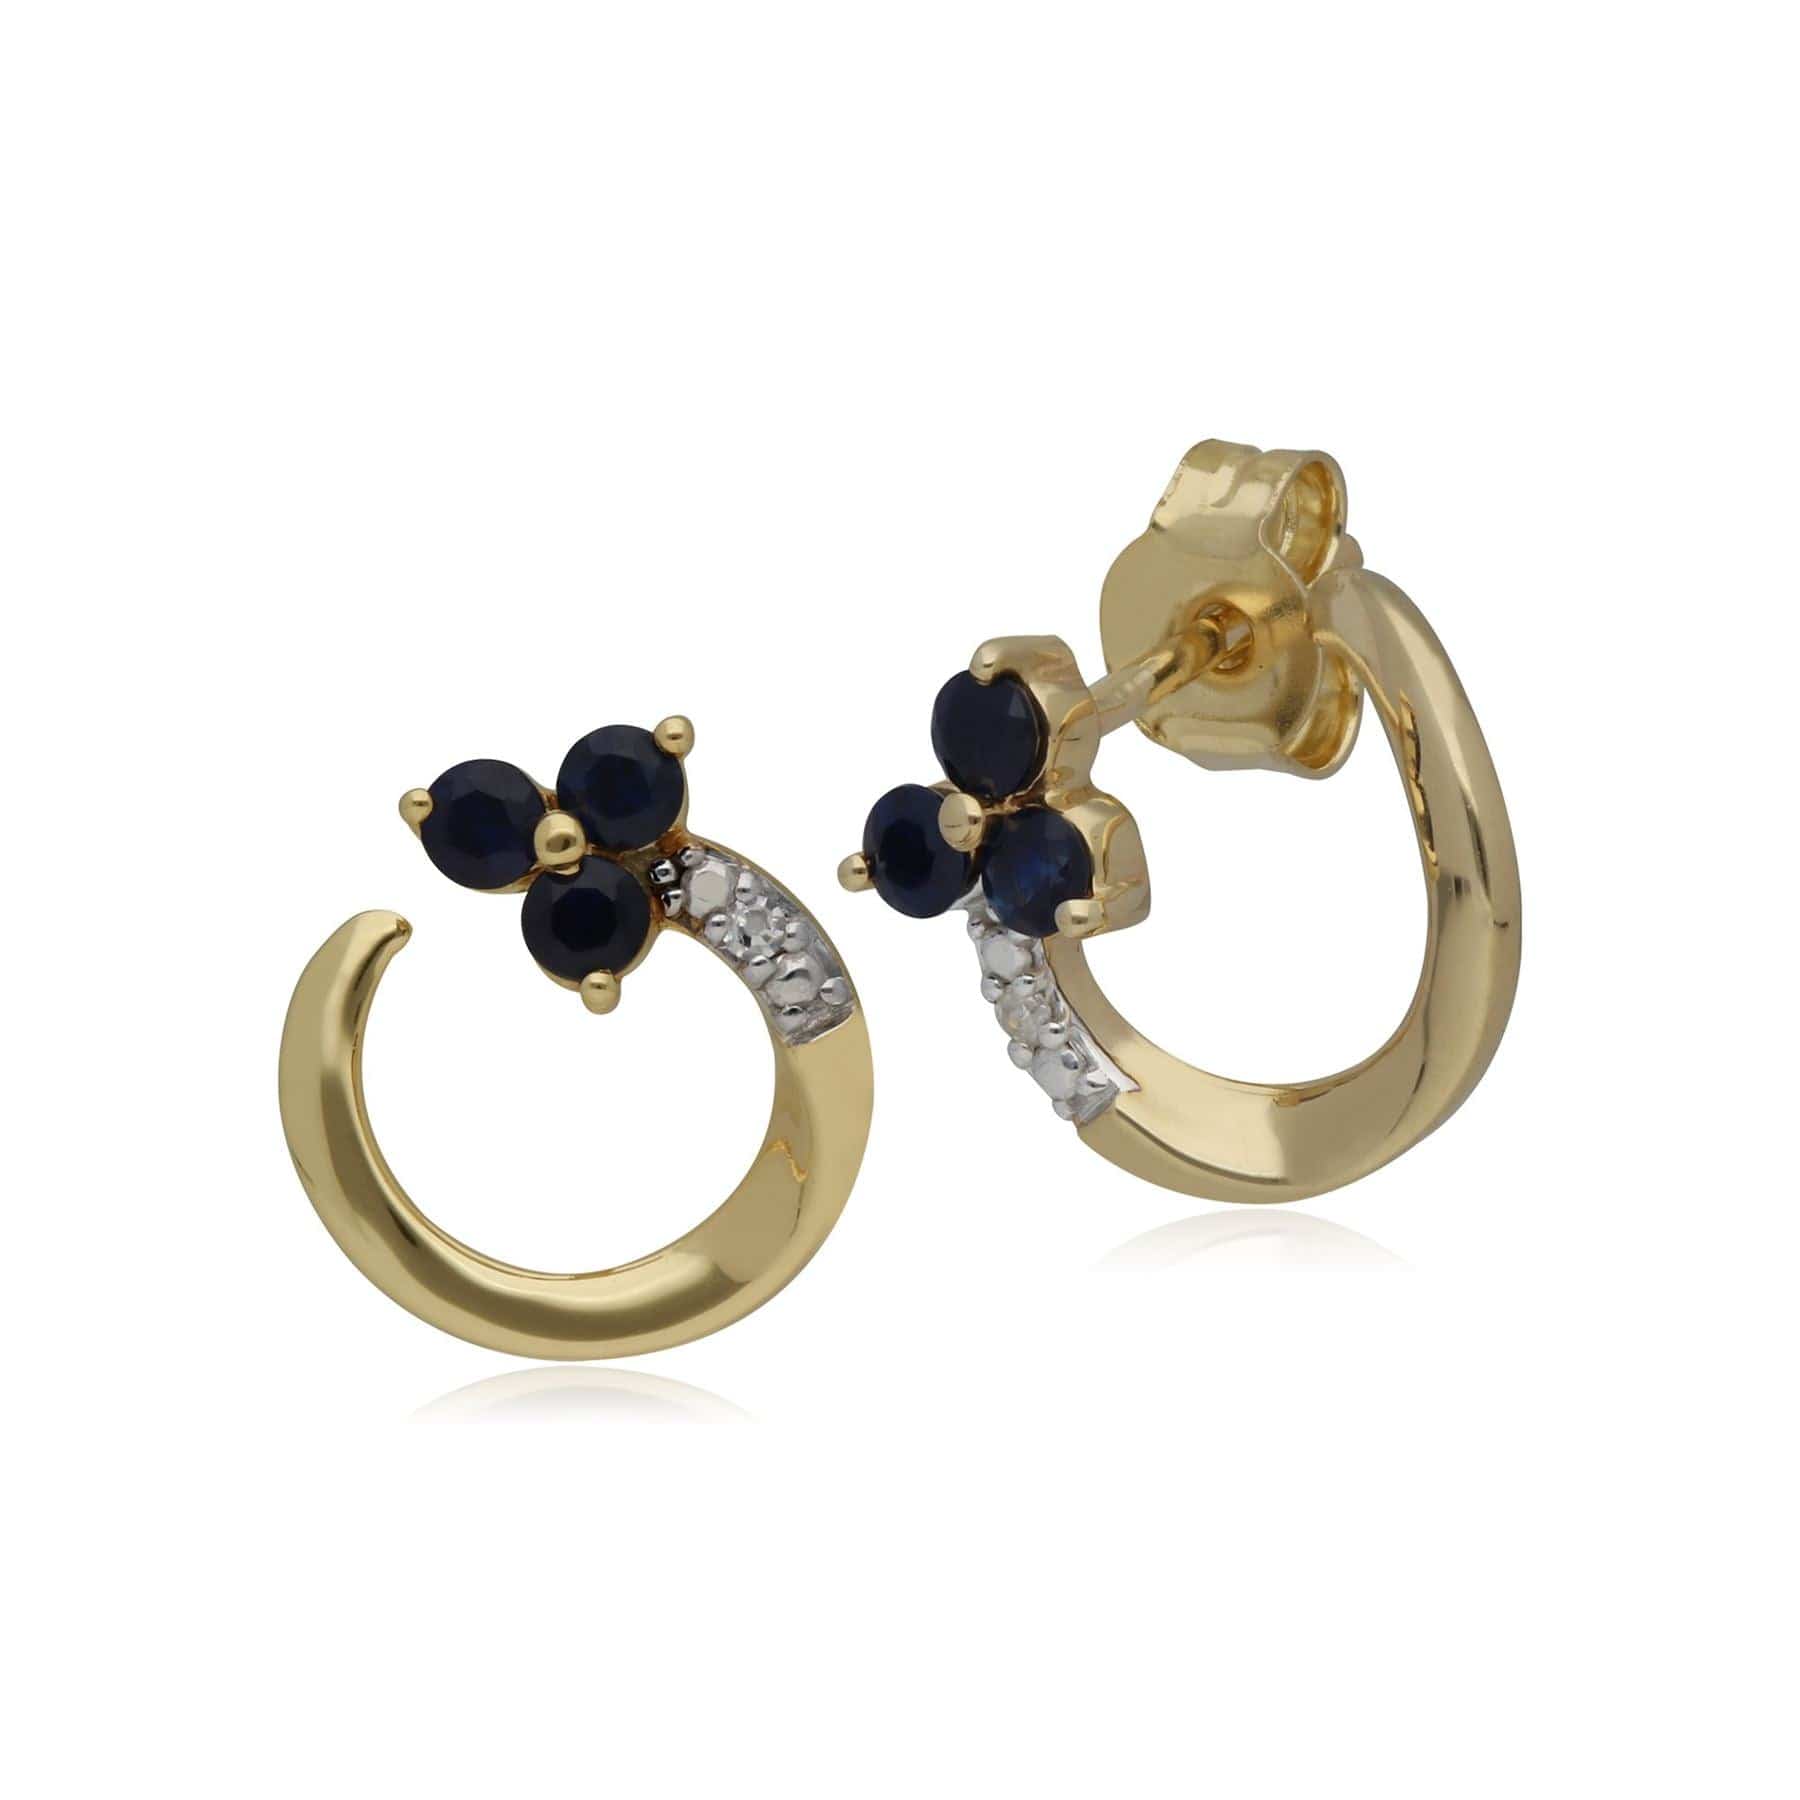 Image of Classic Floral Sapphire & Diamond Swirl Stud Earrings in 9ct Yellow Gold